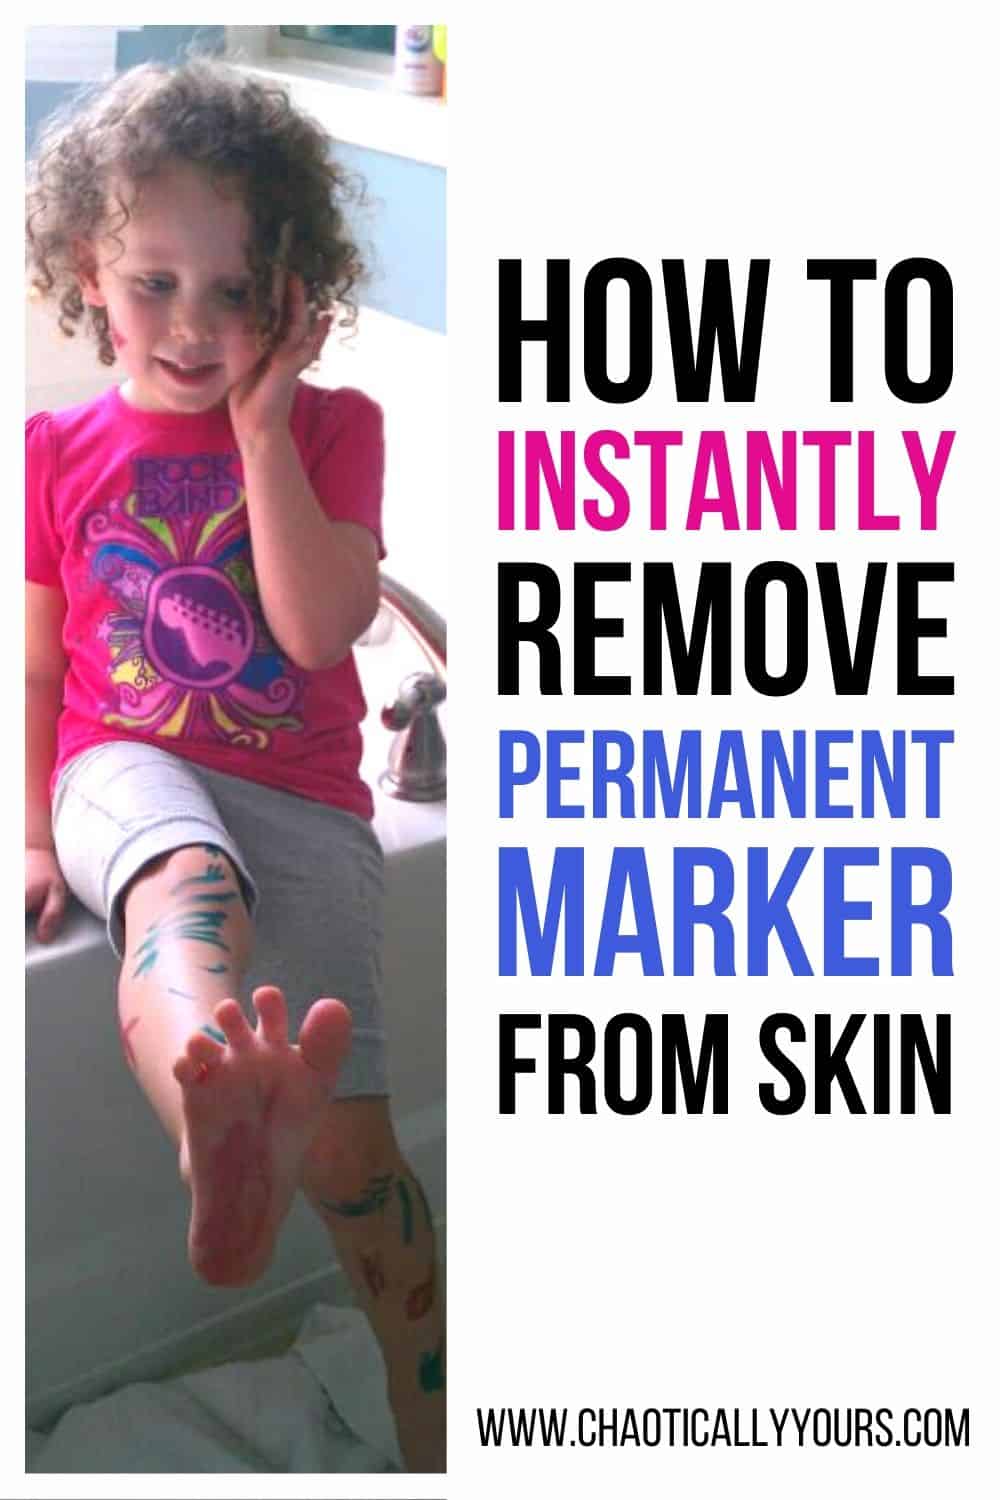 Remove Permanent Marker from Skin 2